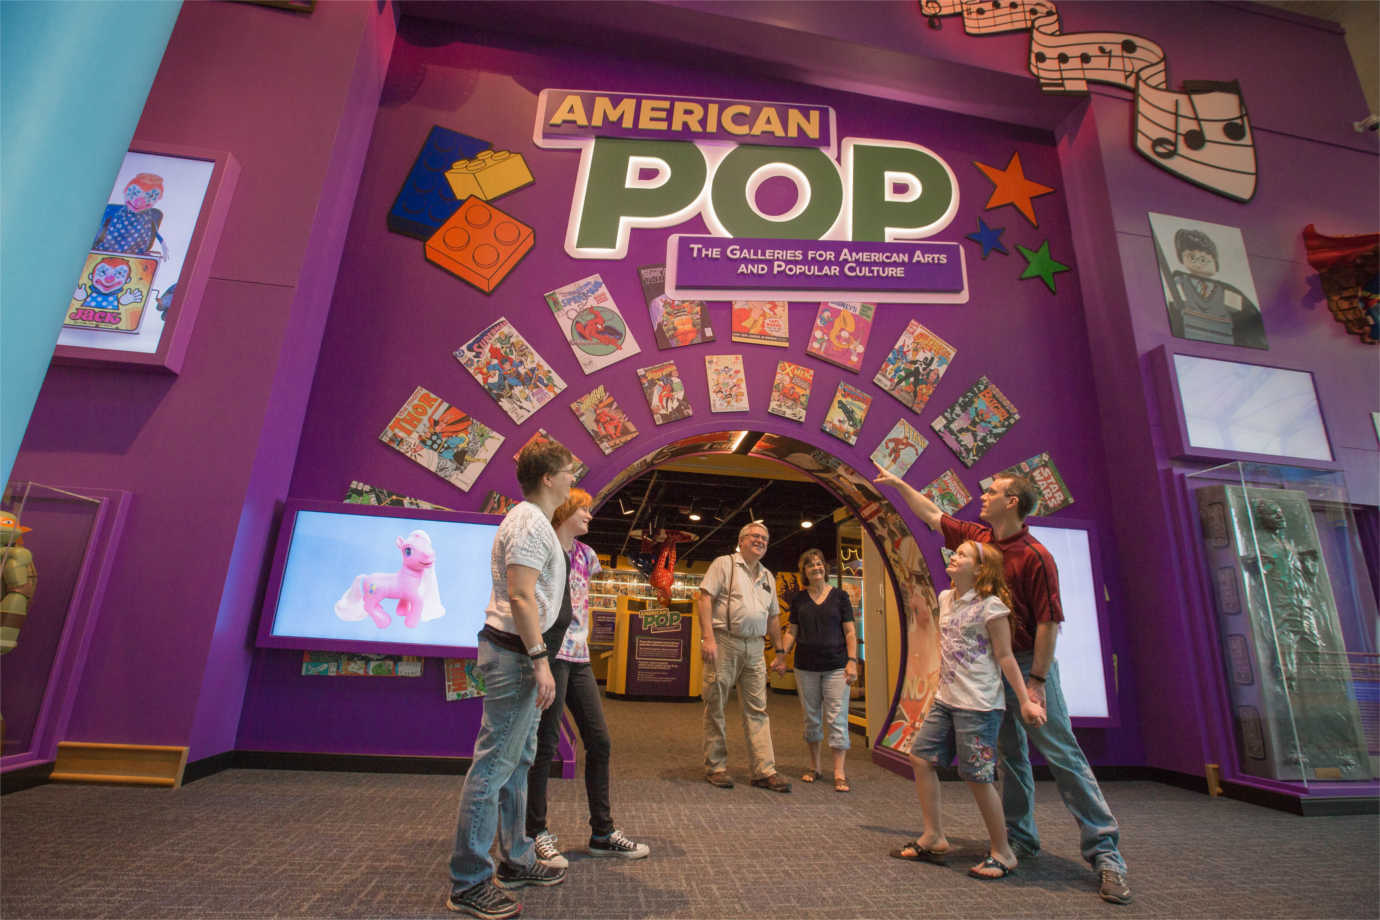 *American Pop*, developed in part through an NEH grant, allows children and families to rethink popular culture. Image courtesy of the Children's Museum of Indianapolis.